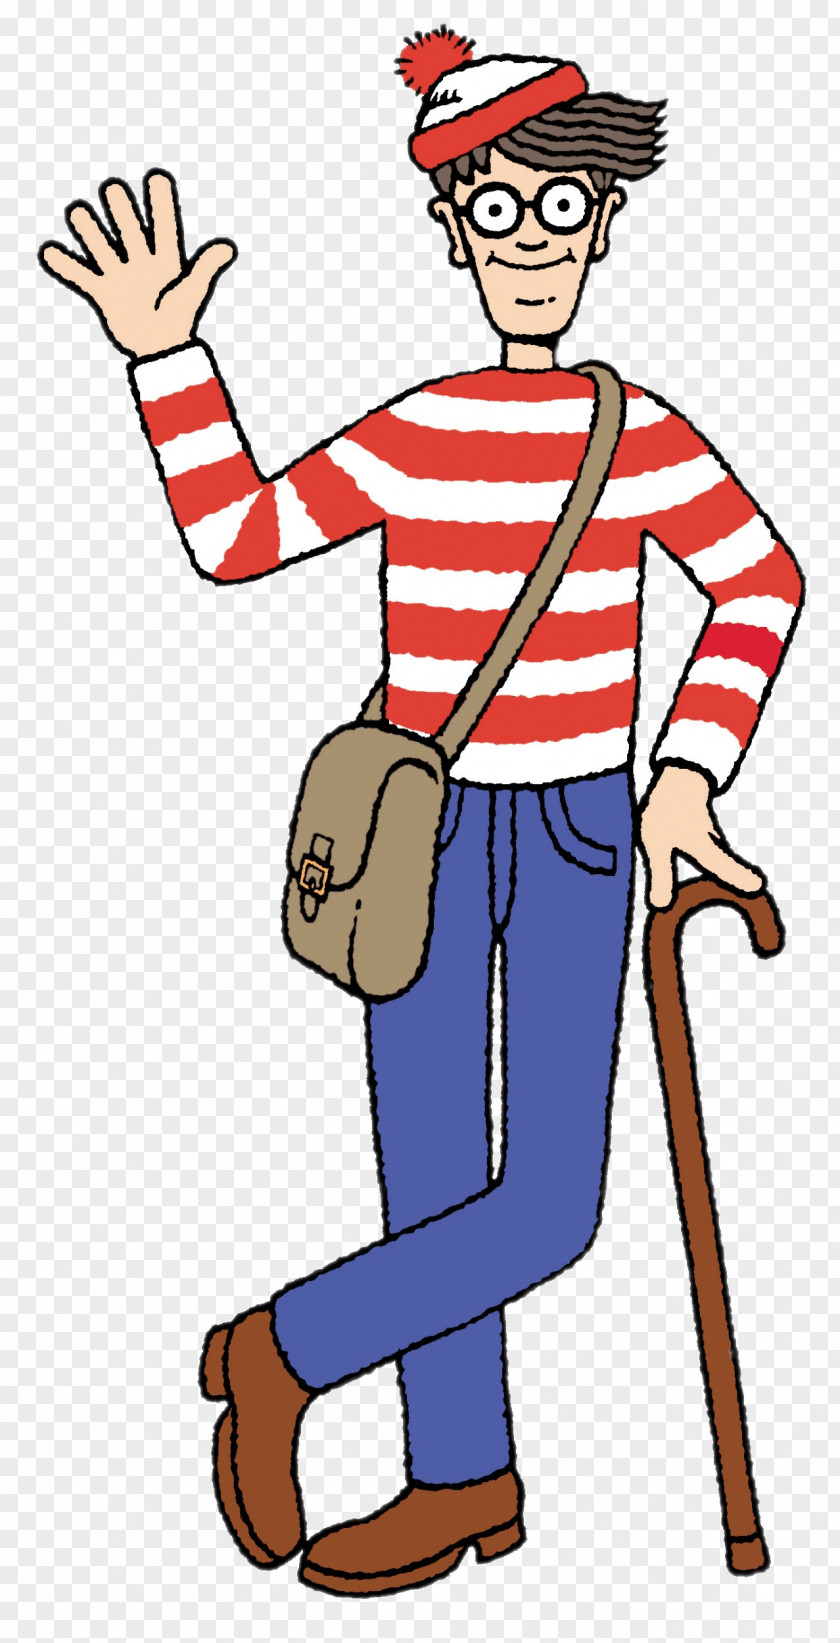 Goodbye Where's Wally? United Kingdom Children's Literature Book Game PNG